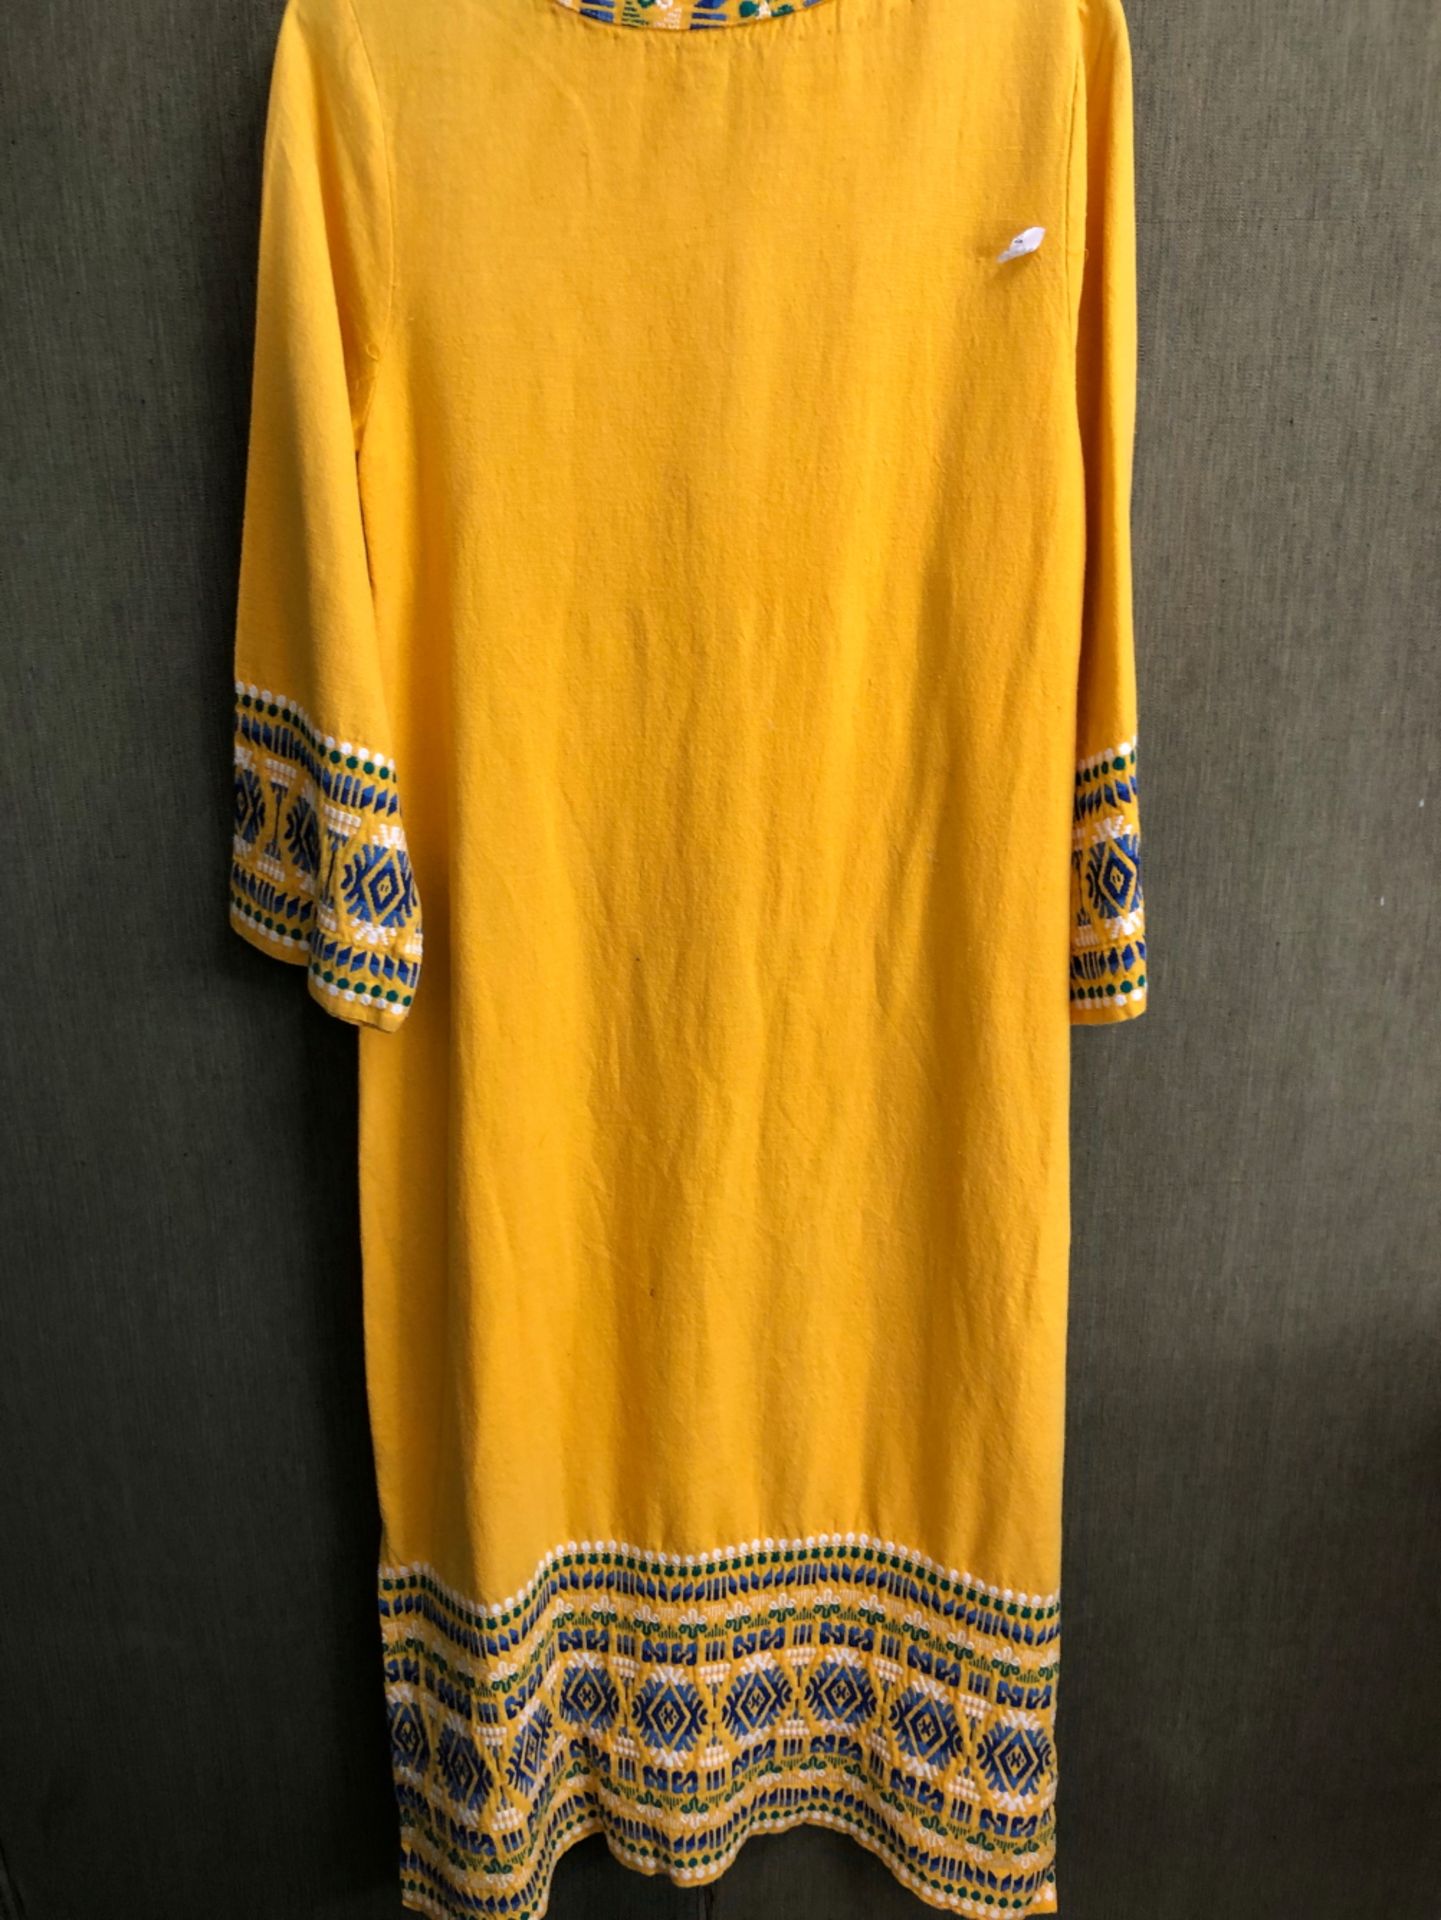 KAFTAN: A YELLOW GROUND KAFTAN DRESS TRIMMED WITH BLUE, GREEN AND WHITE GEOMETRIC BANDS, SLEEVE - Image 5 of 5